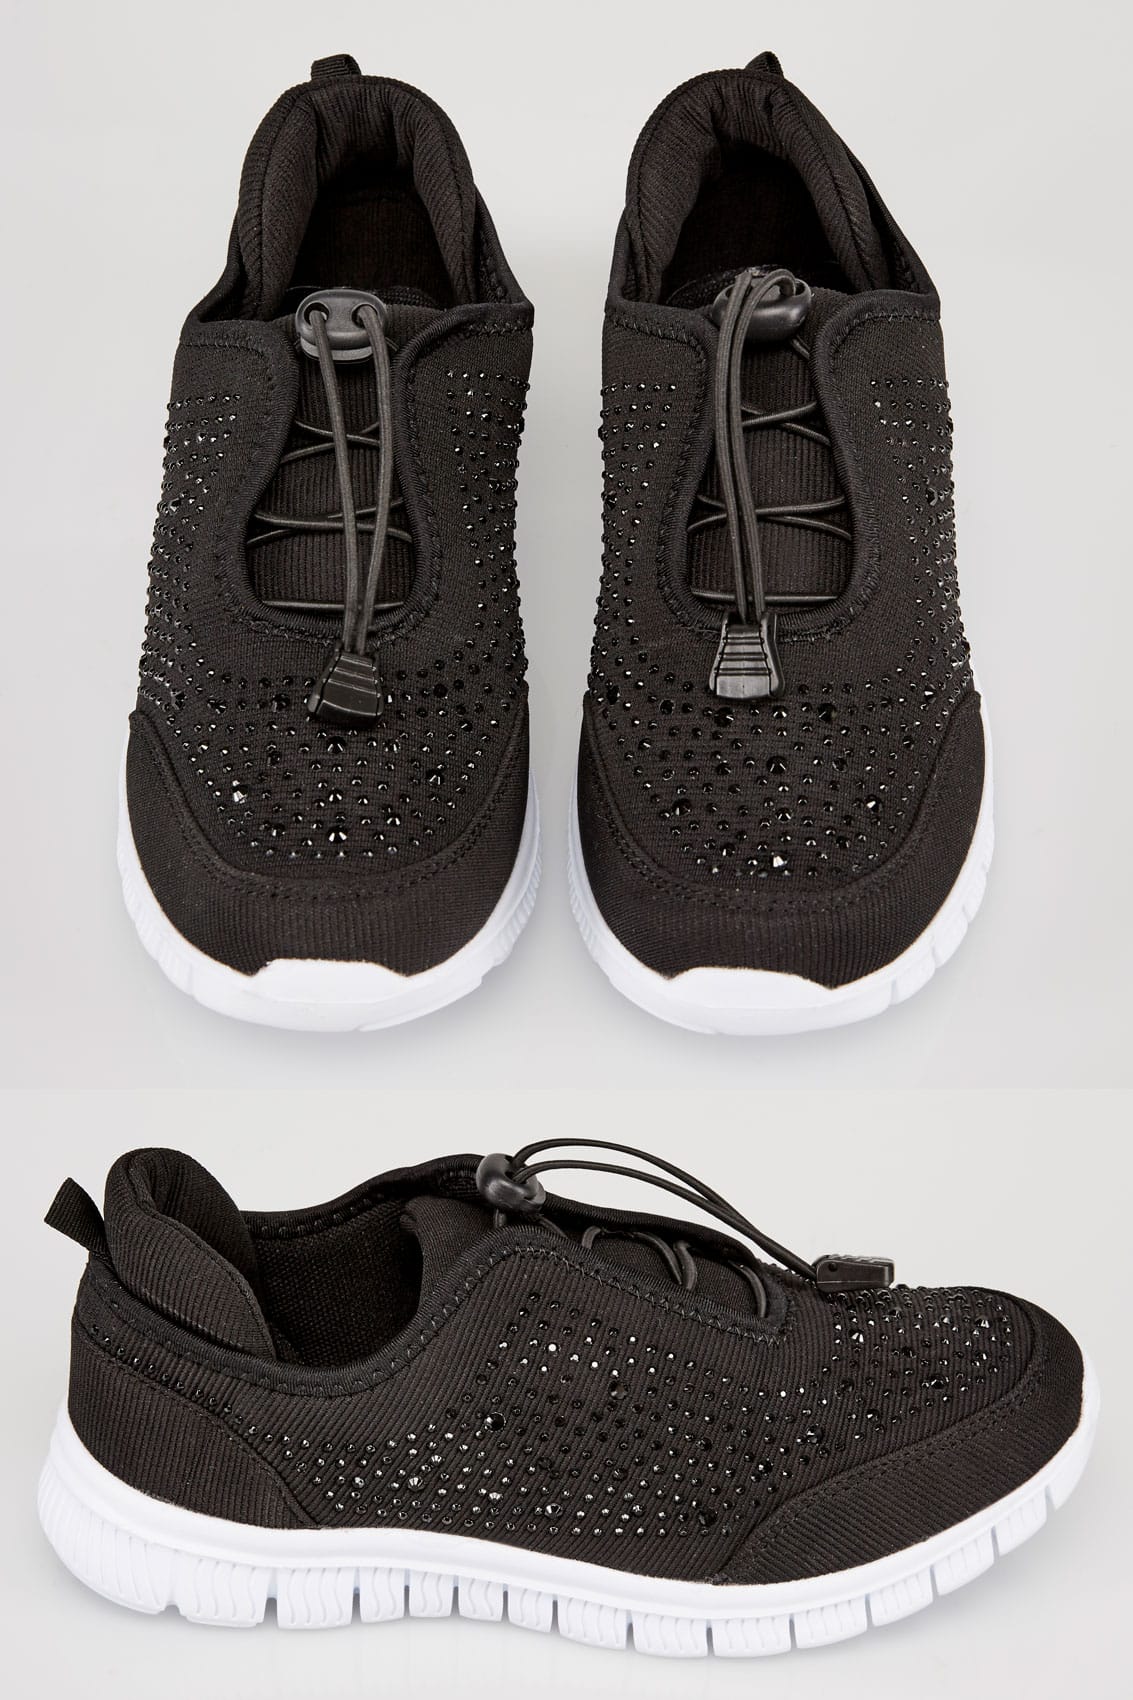 Black Embellished Trainers In EEE Fit